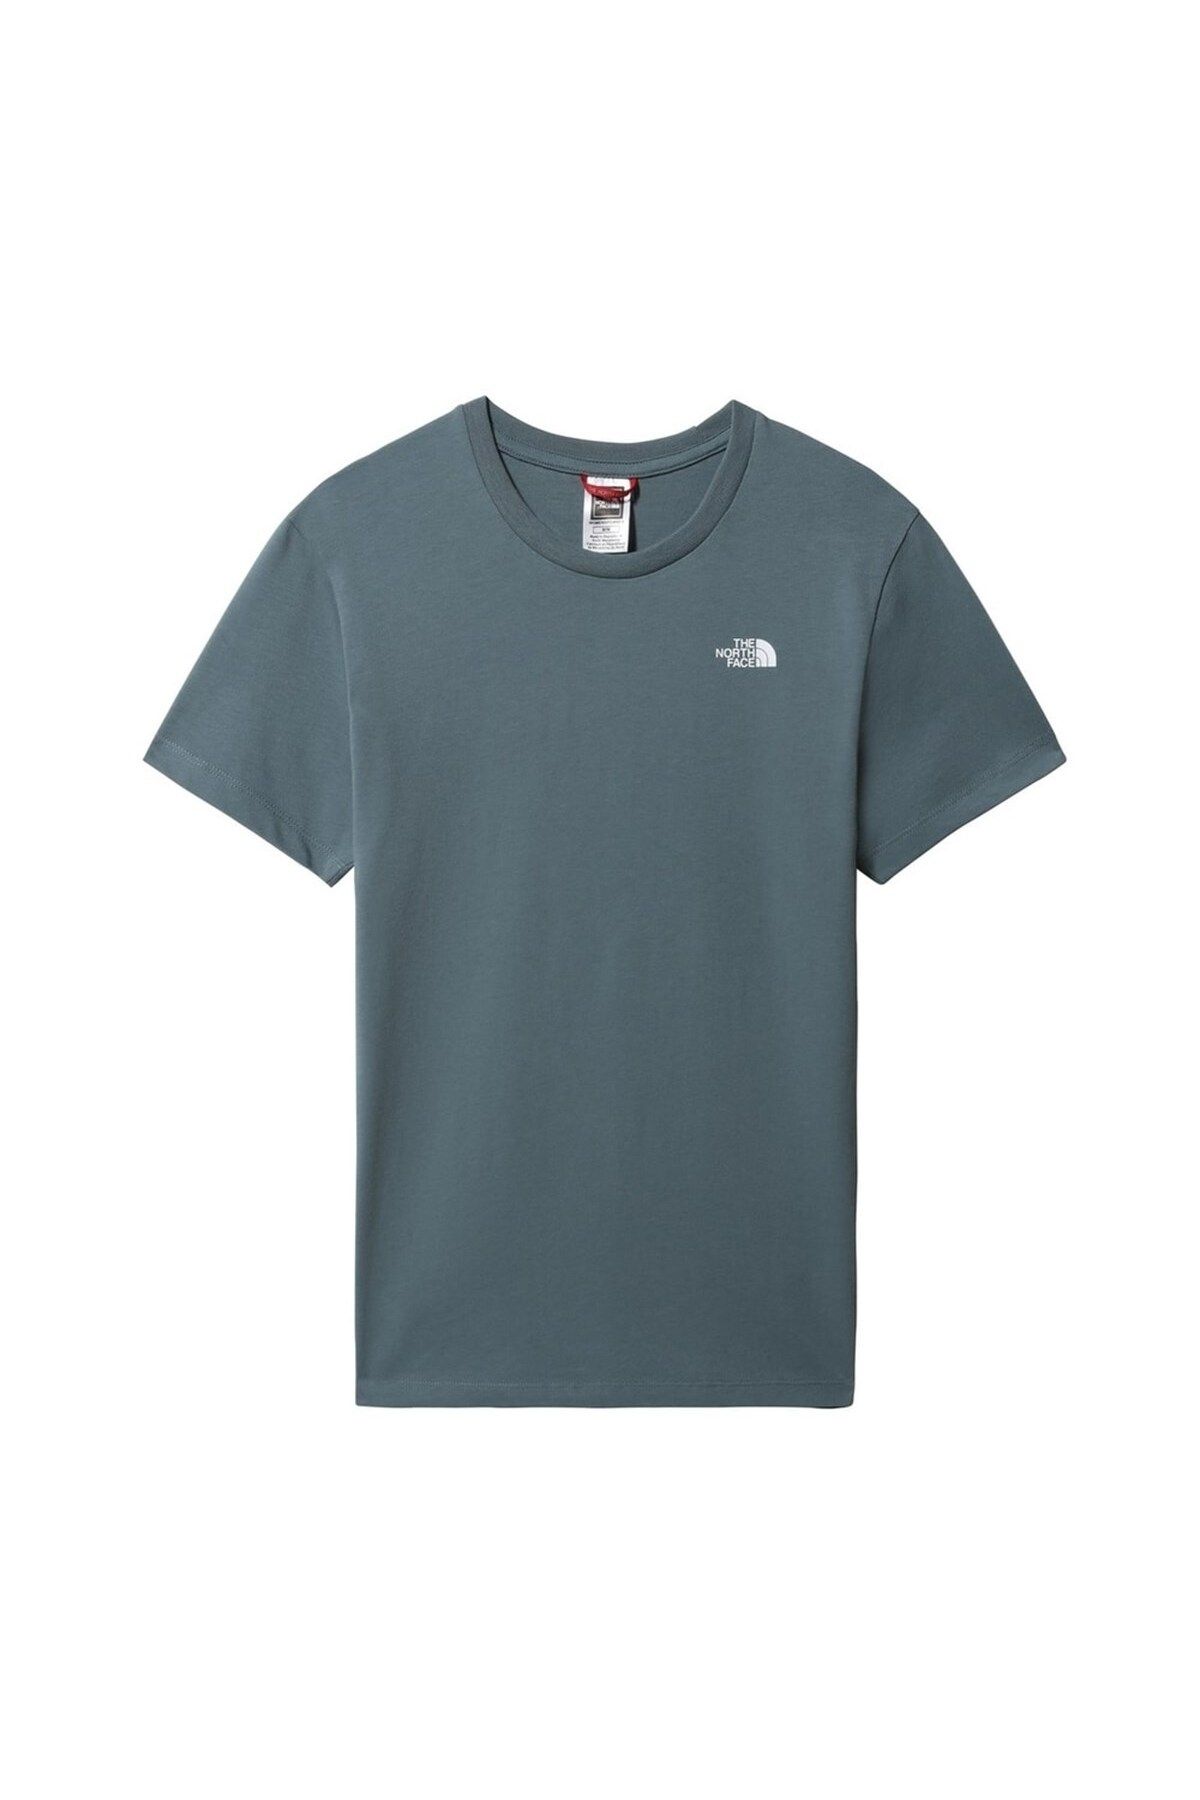 The North Face The Nort Face W S/s Sımple Dome Tee Kadın T-shirt Nf0a4t1aa9l1